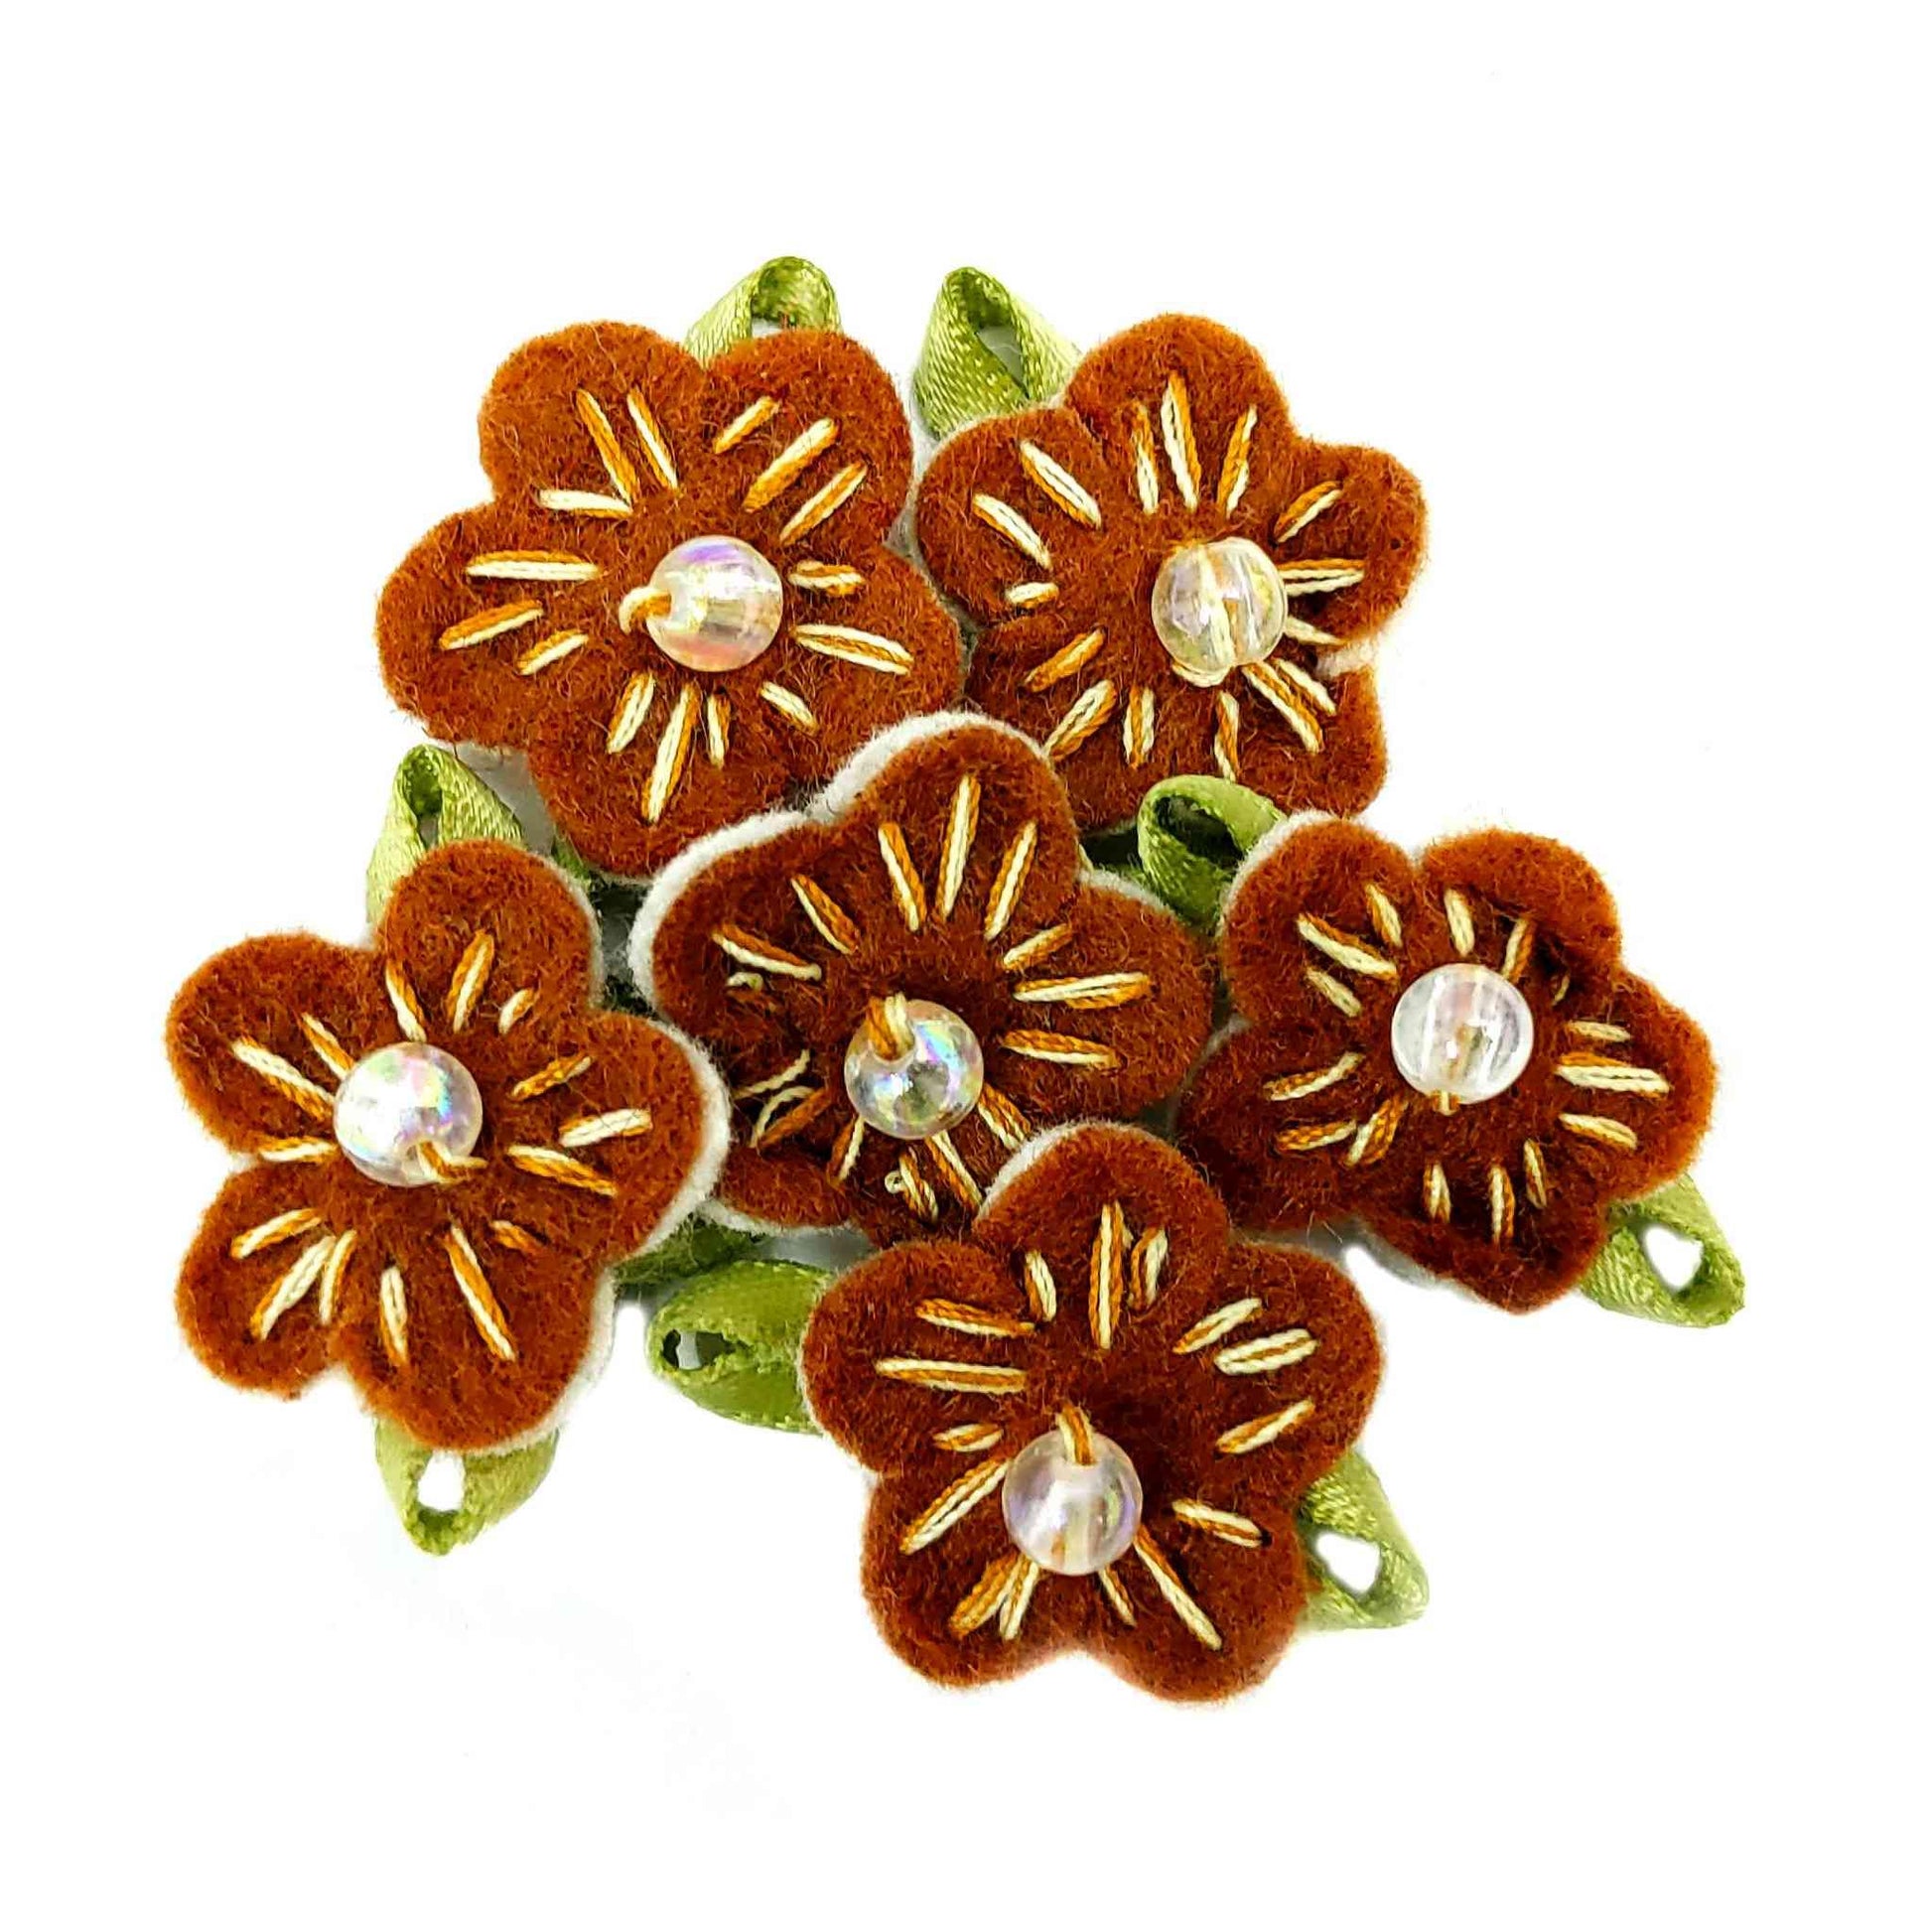 Beautiful Fabric Small Flowers for DIY Craft, Trouseau Packing or Decoration (Bunch of 12) - Design 44, Saddle Brown - Indian Petals